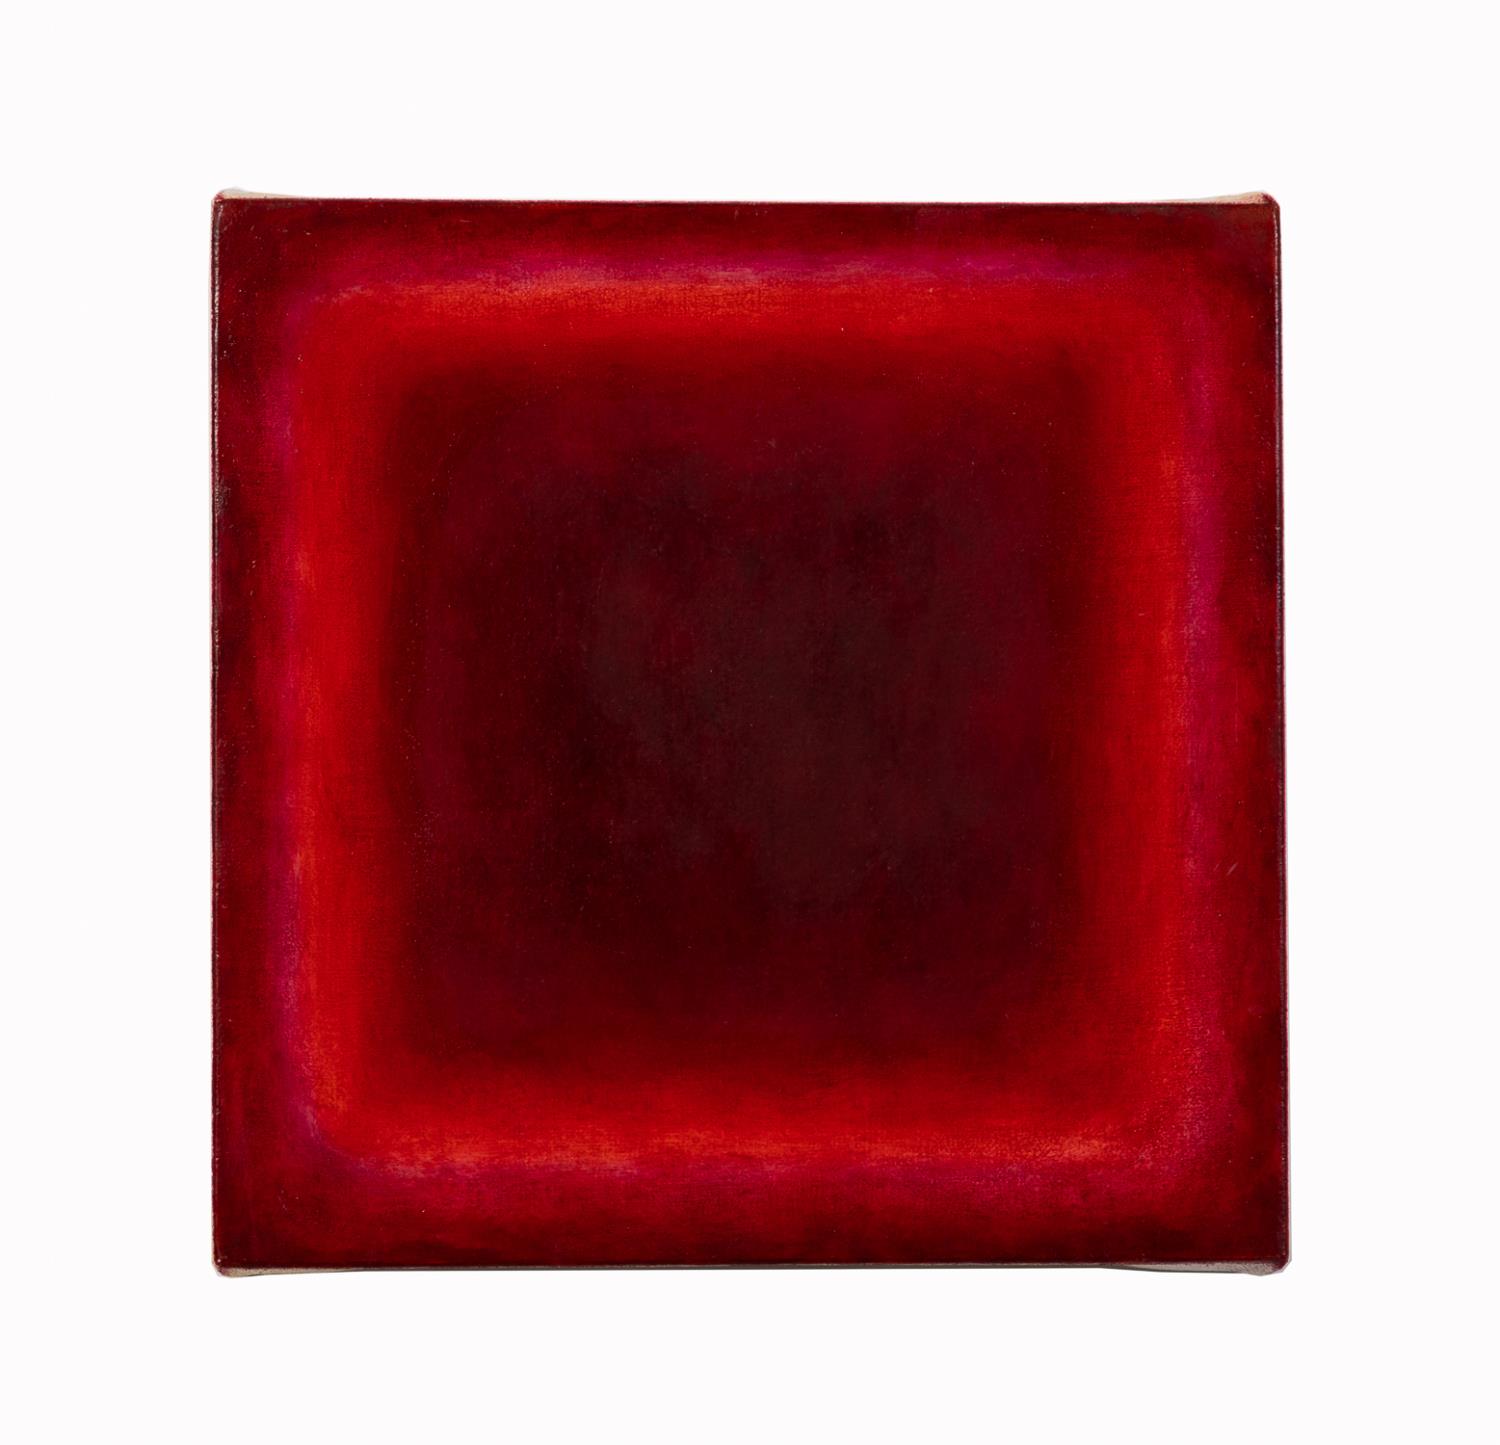 SHINGO FRANCIS RED ABSTRACT SQUARE 29f54f